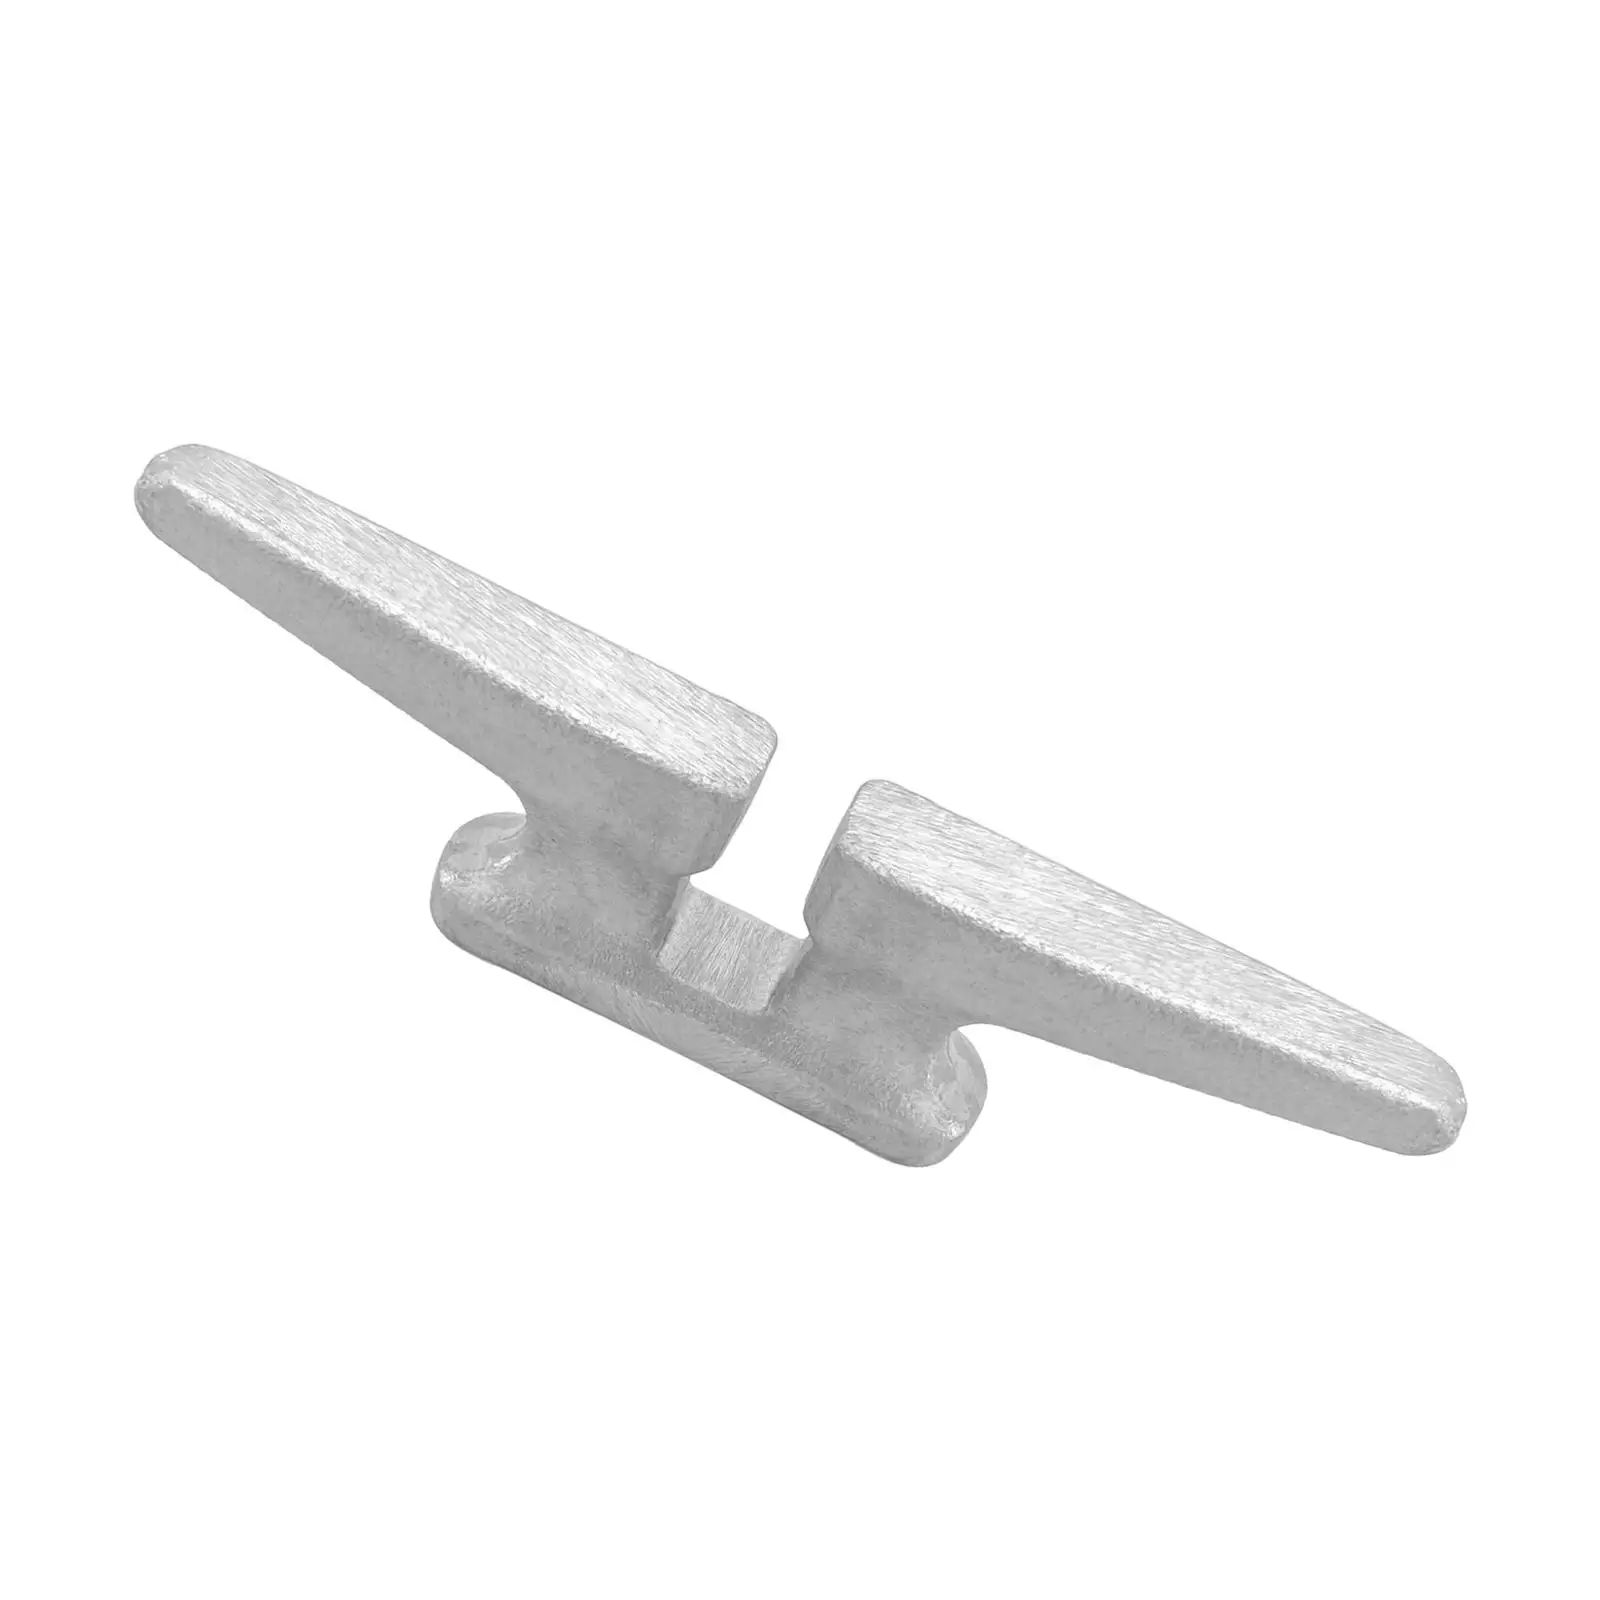 Boat Cleat Easy Installation Dock Cleat for Decorative Applications Sailing